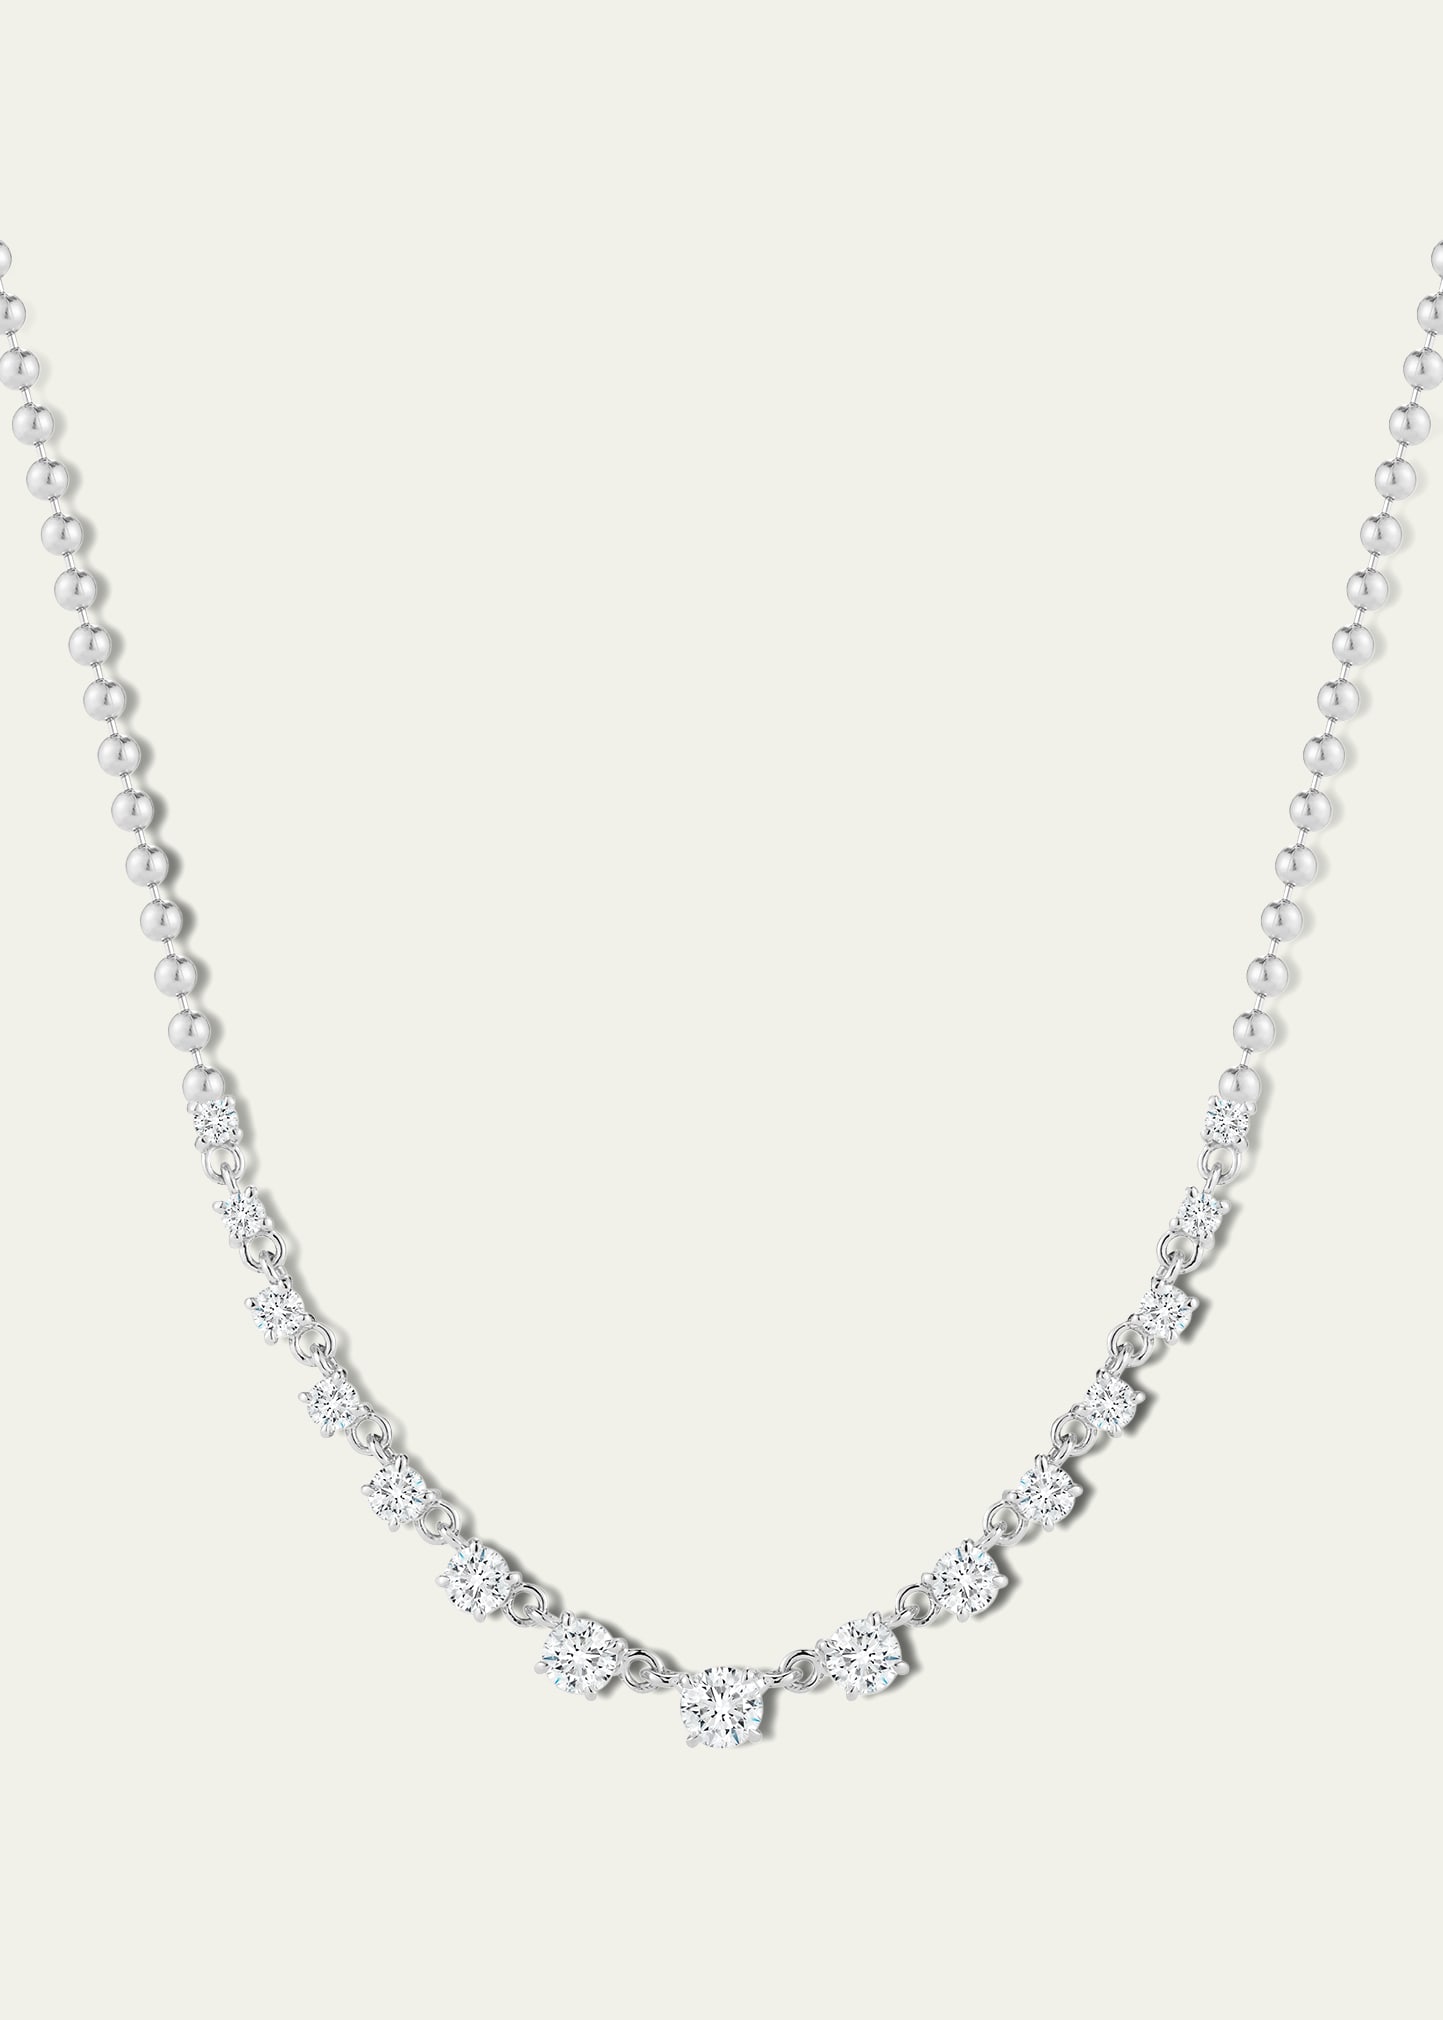 Jemma Wynne 18k White Gold Prive Graduated Diamond Necklace With Ball Chain